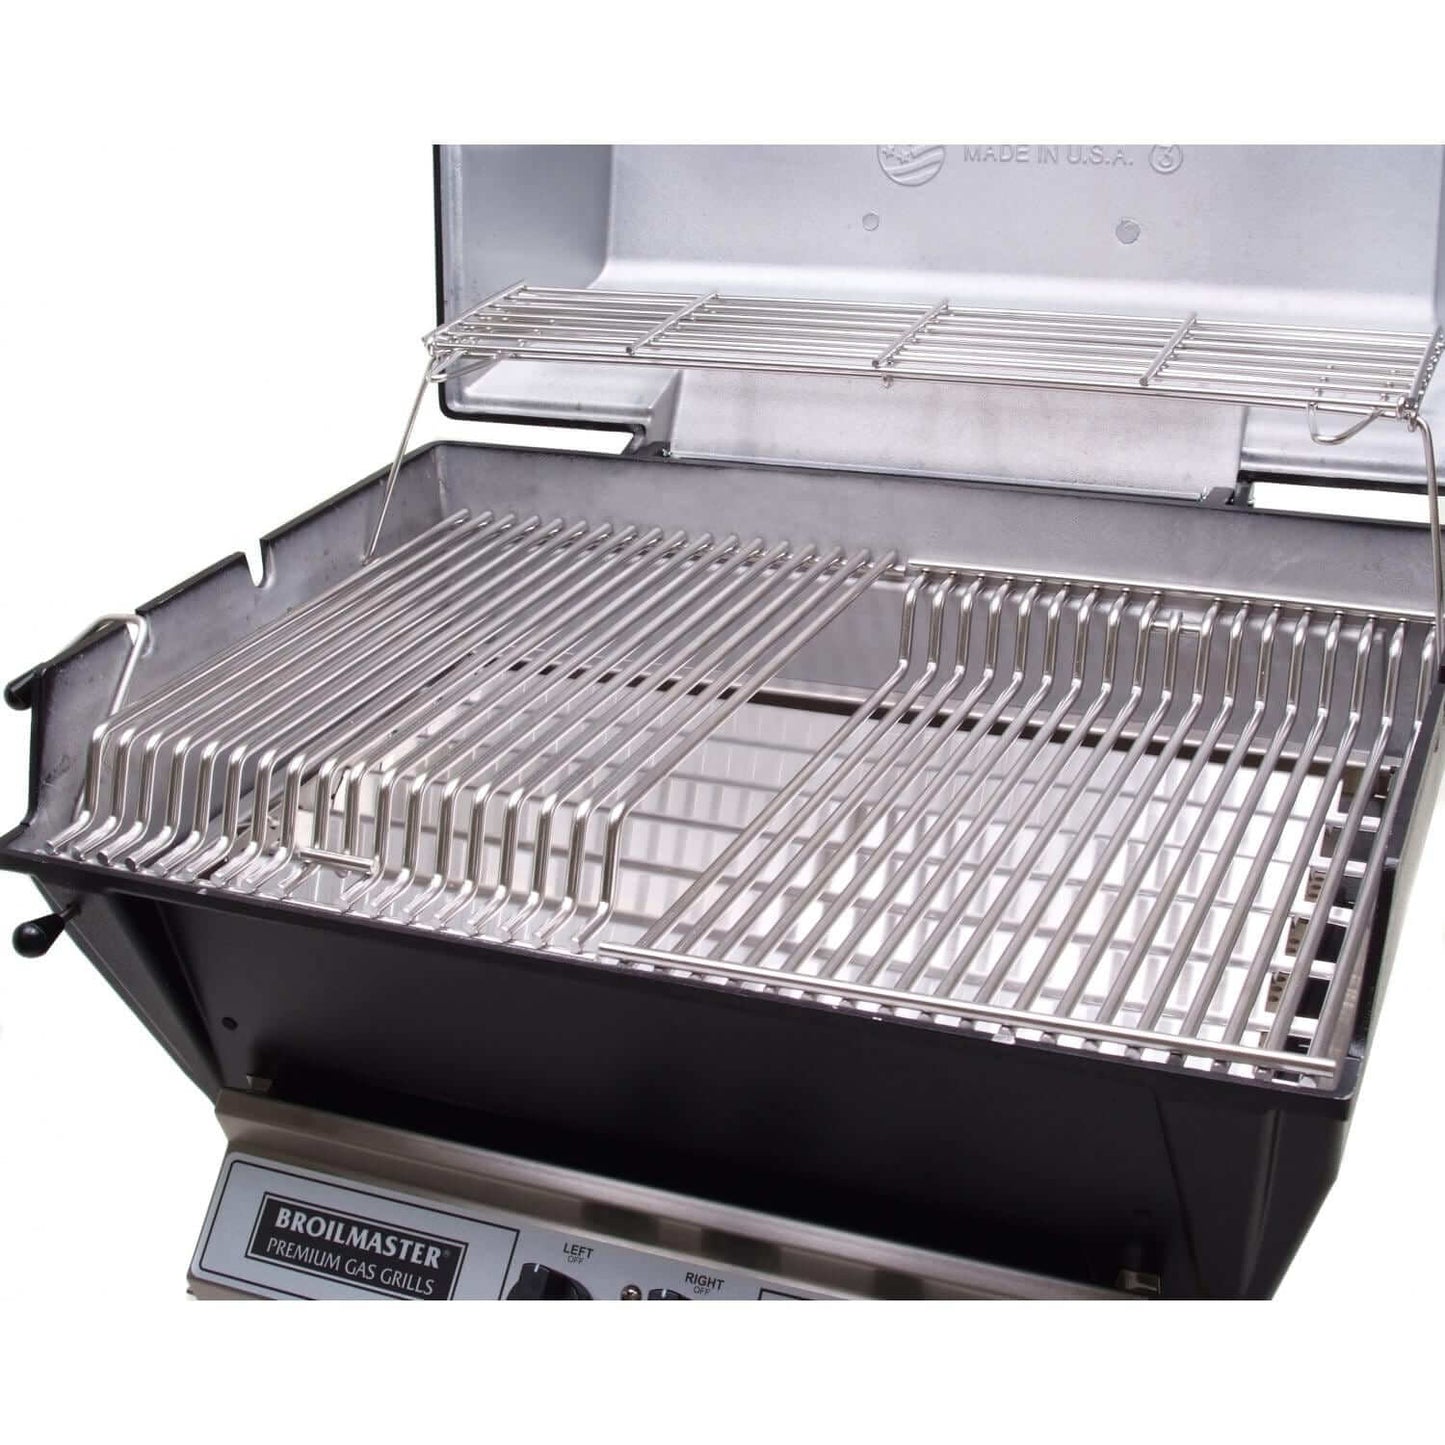 Broilmaster P3-XFN Premium Natural Gas Grill On Stainless Steel Cart